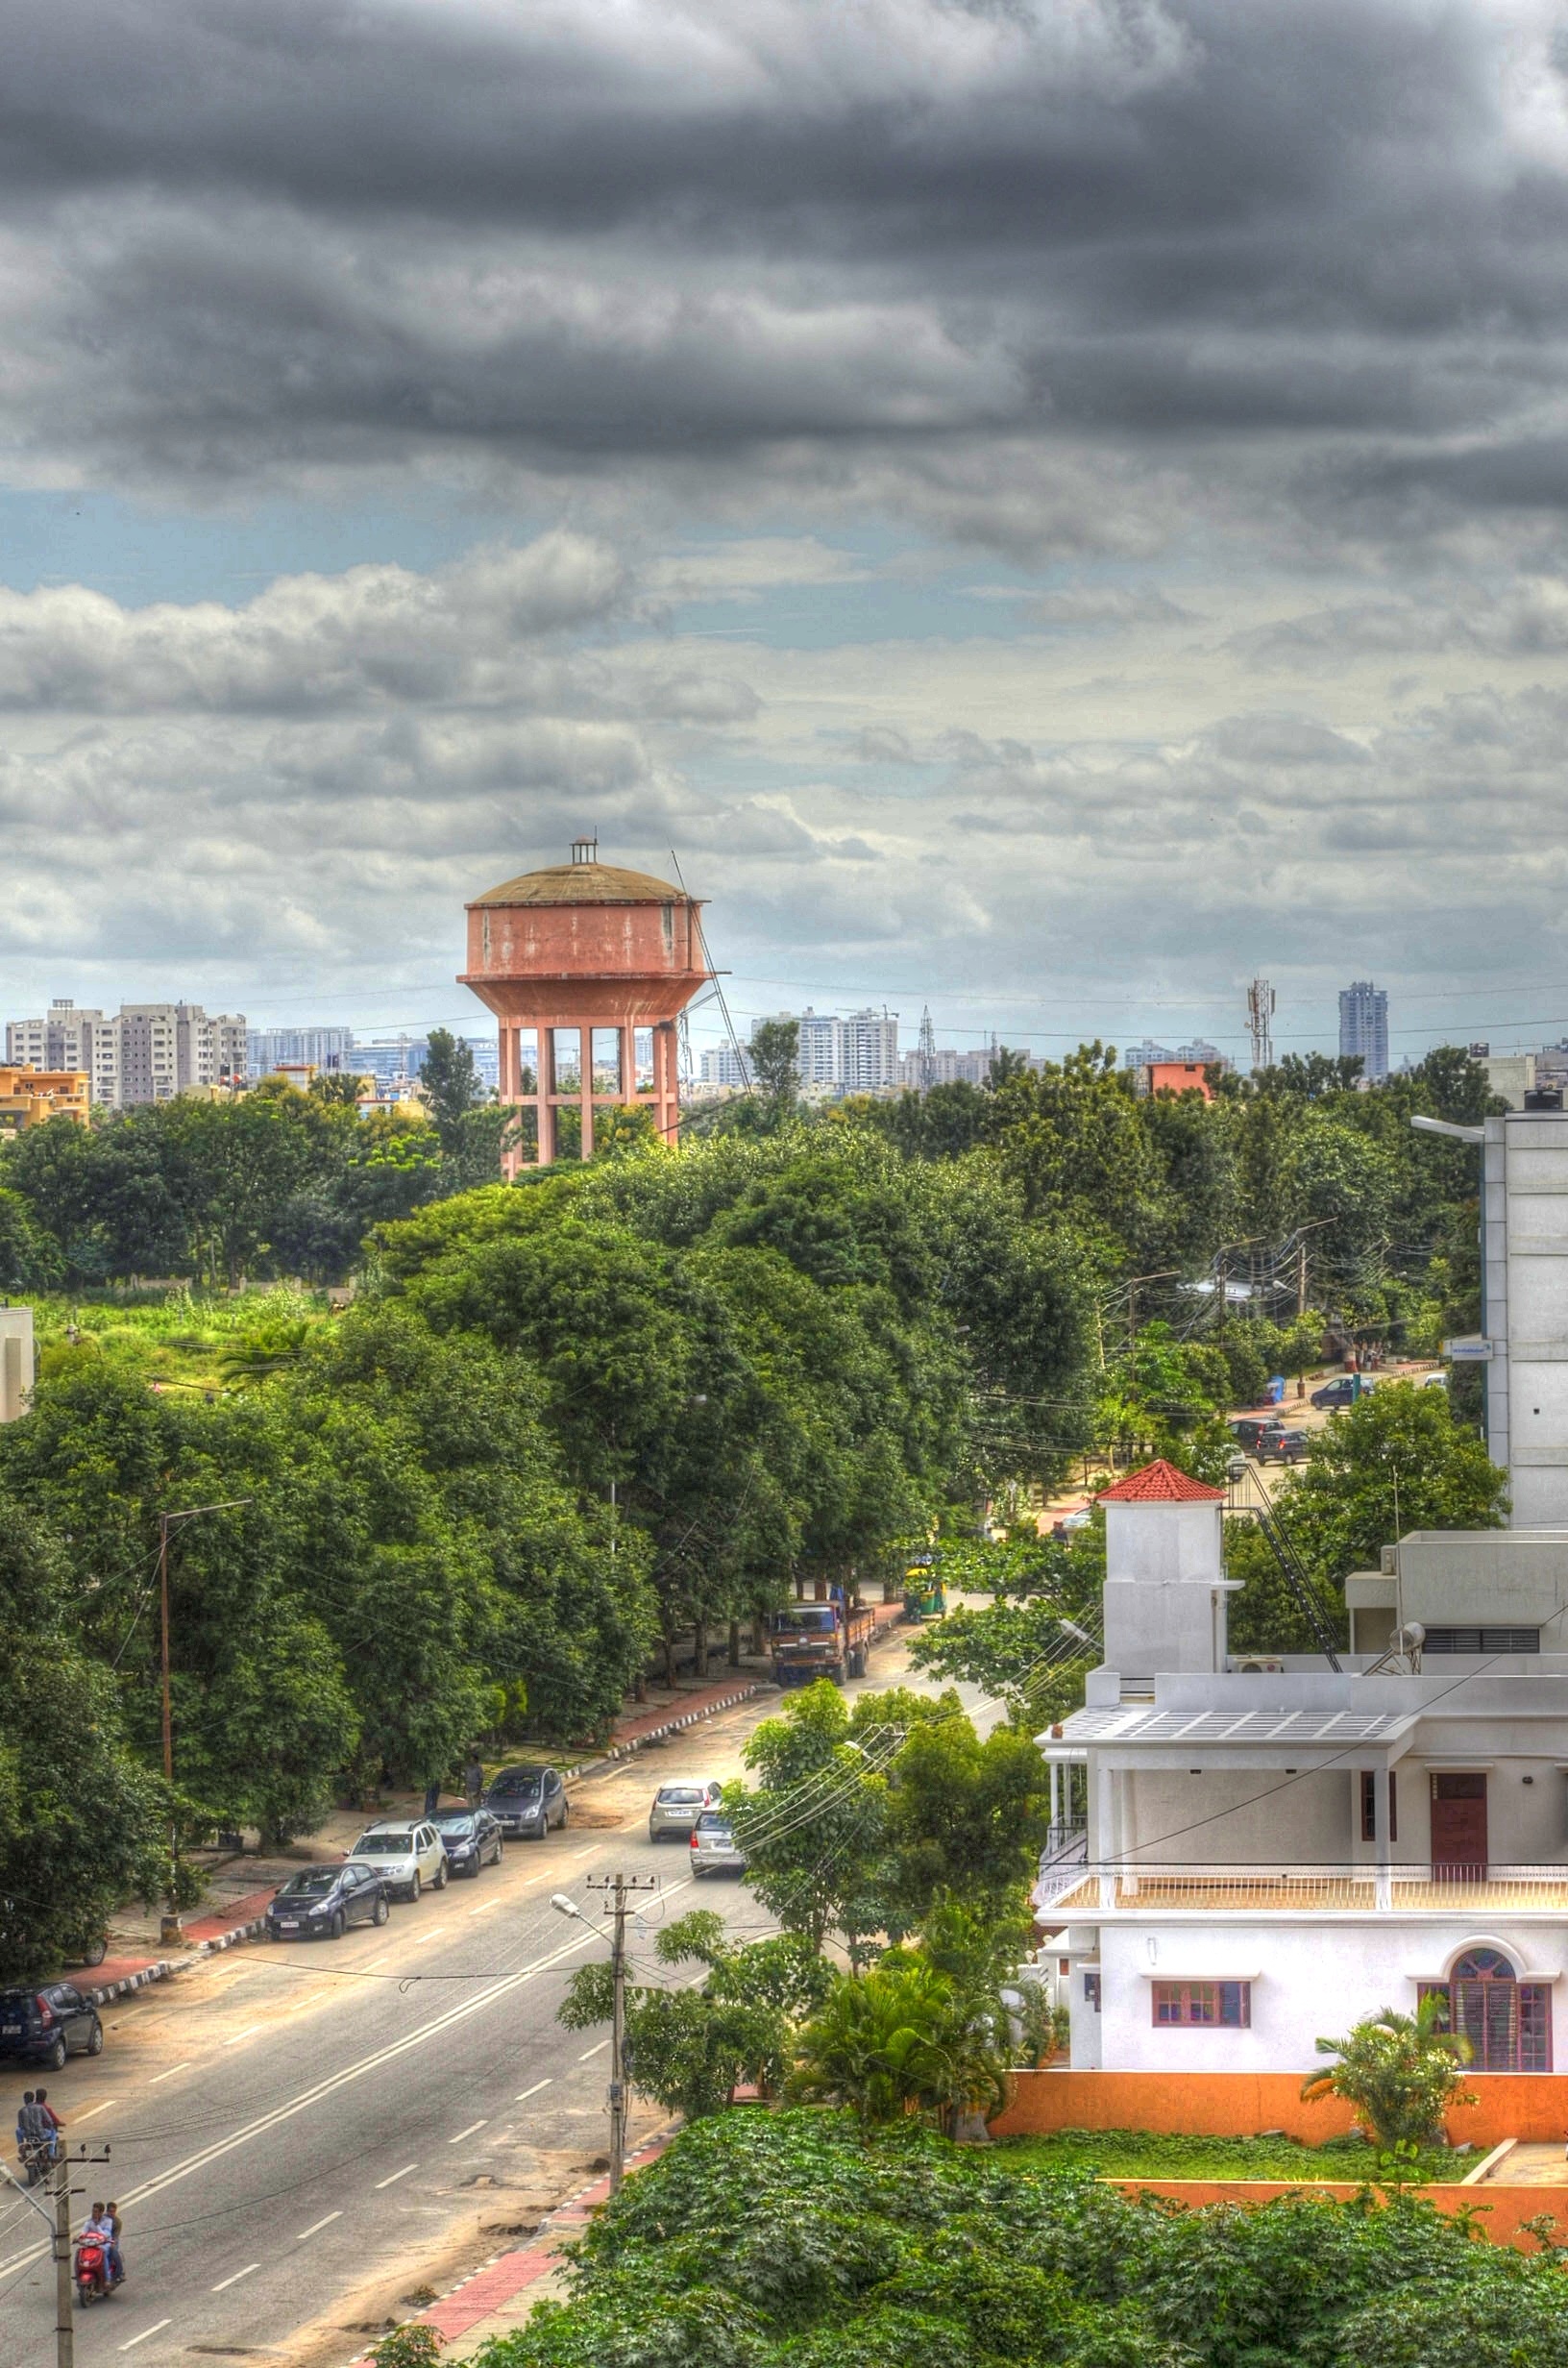 water tank, bangalore, india, city, town, landscape, road, hdr